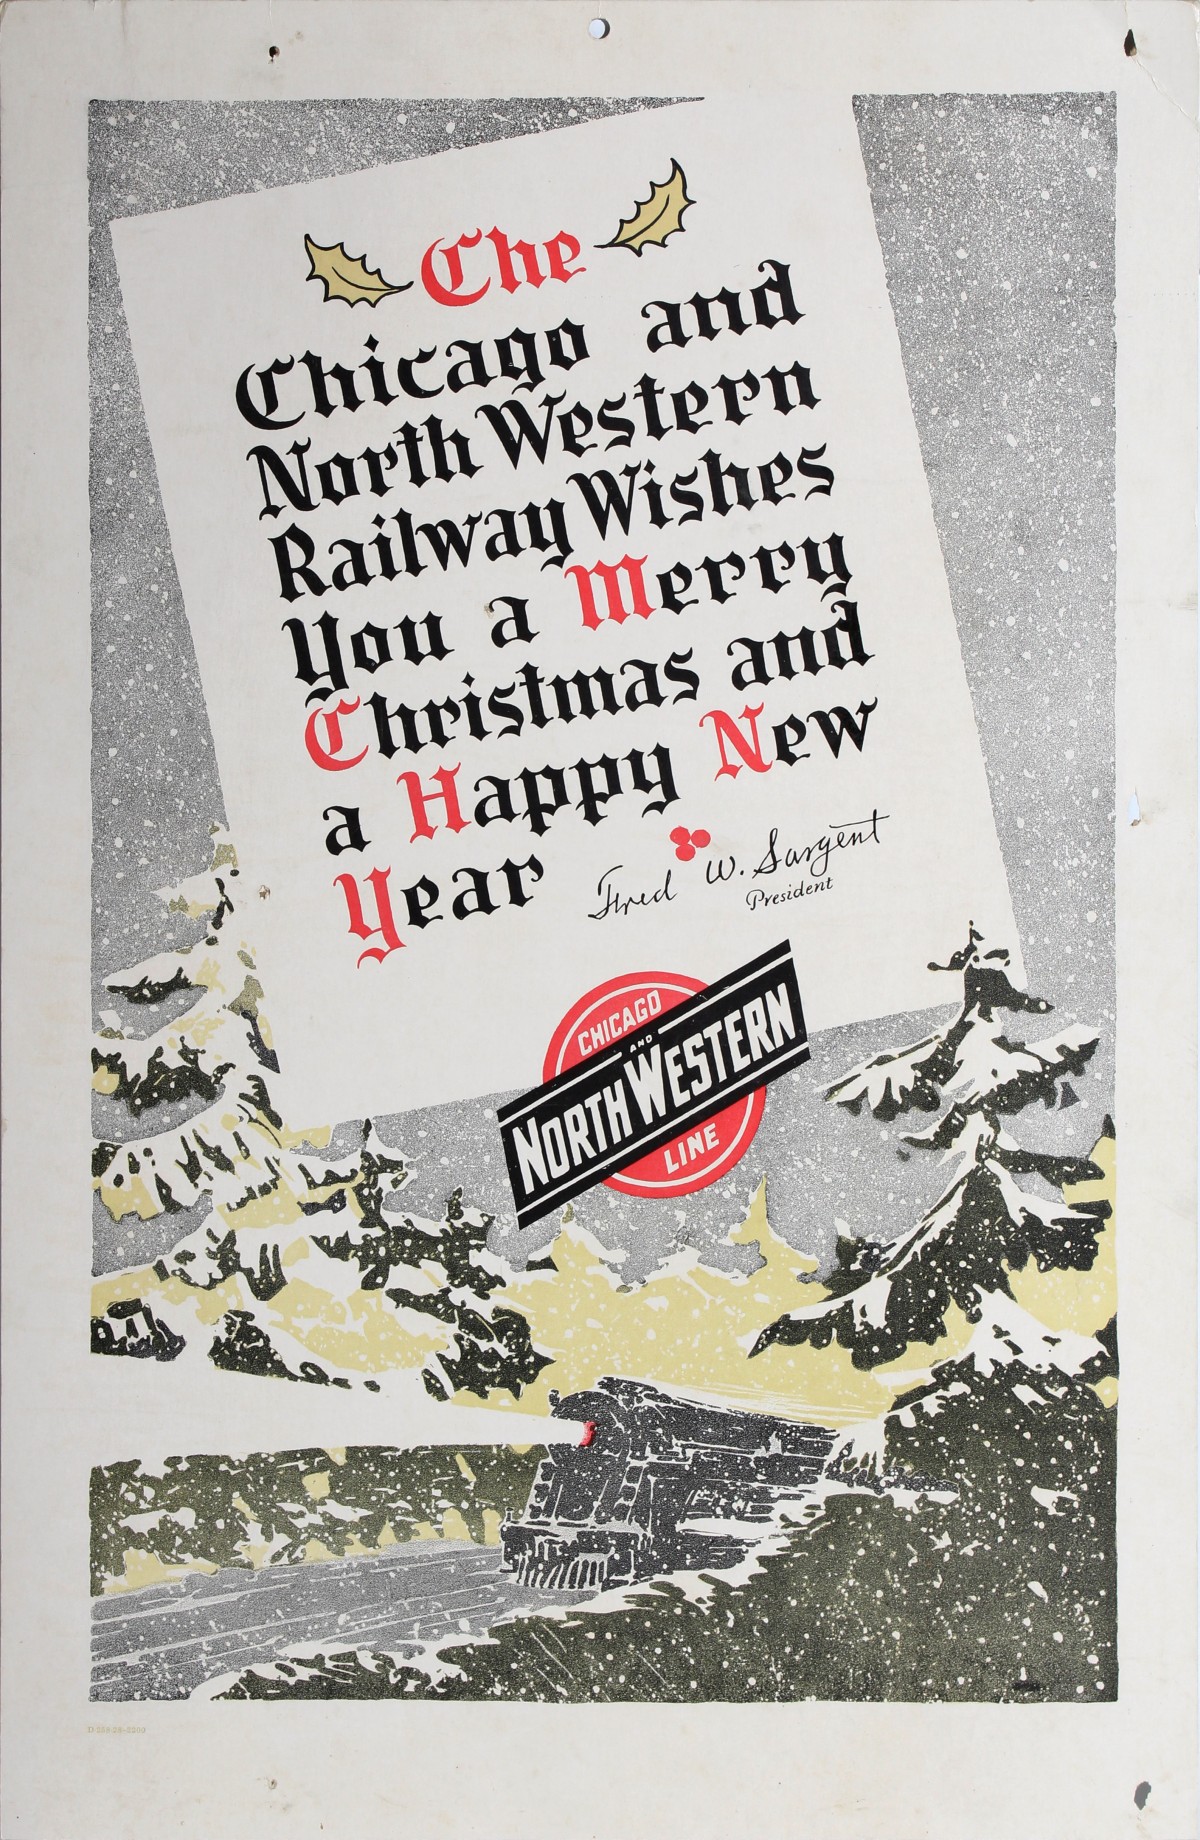 A CHICAGO & NORTH WESTERN RAILROAD CHRISTMAS POSTER